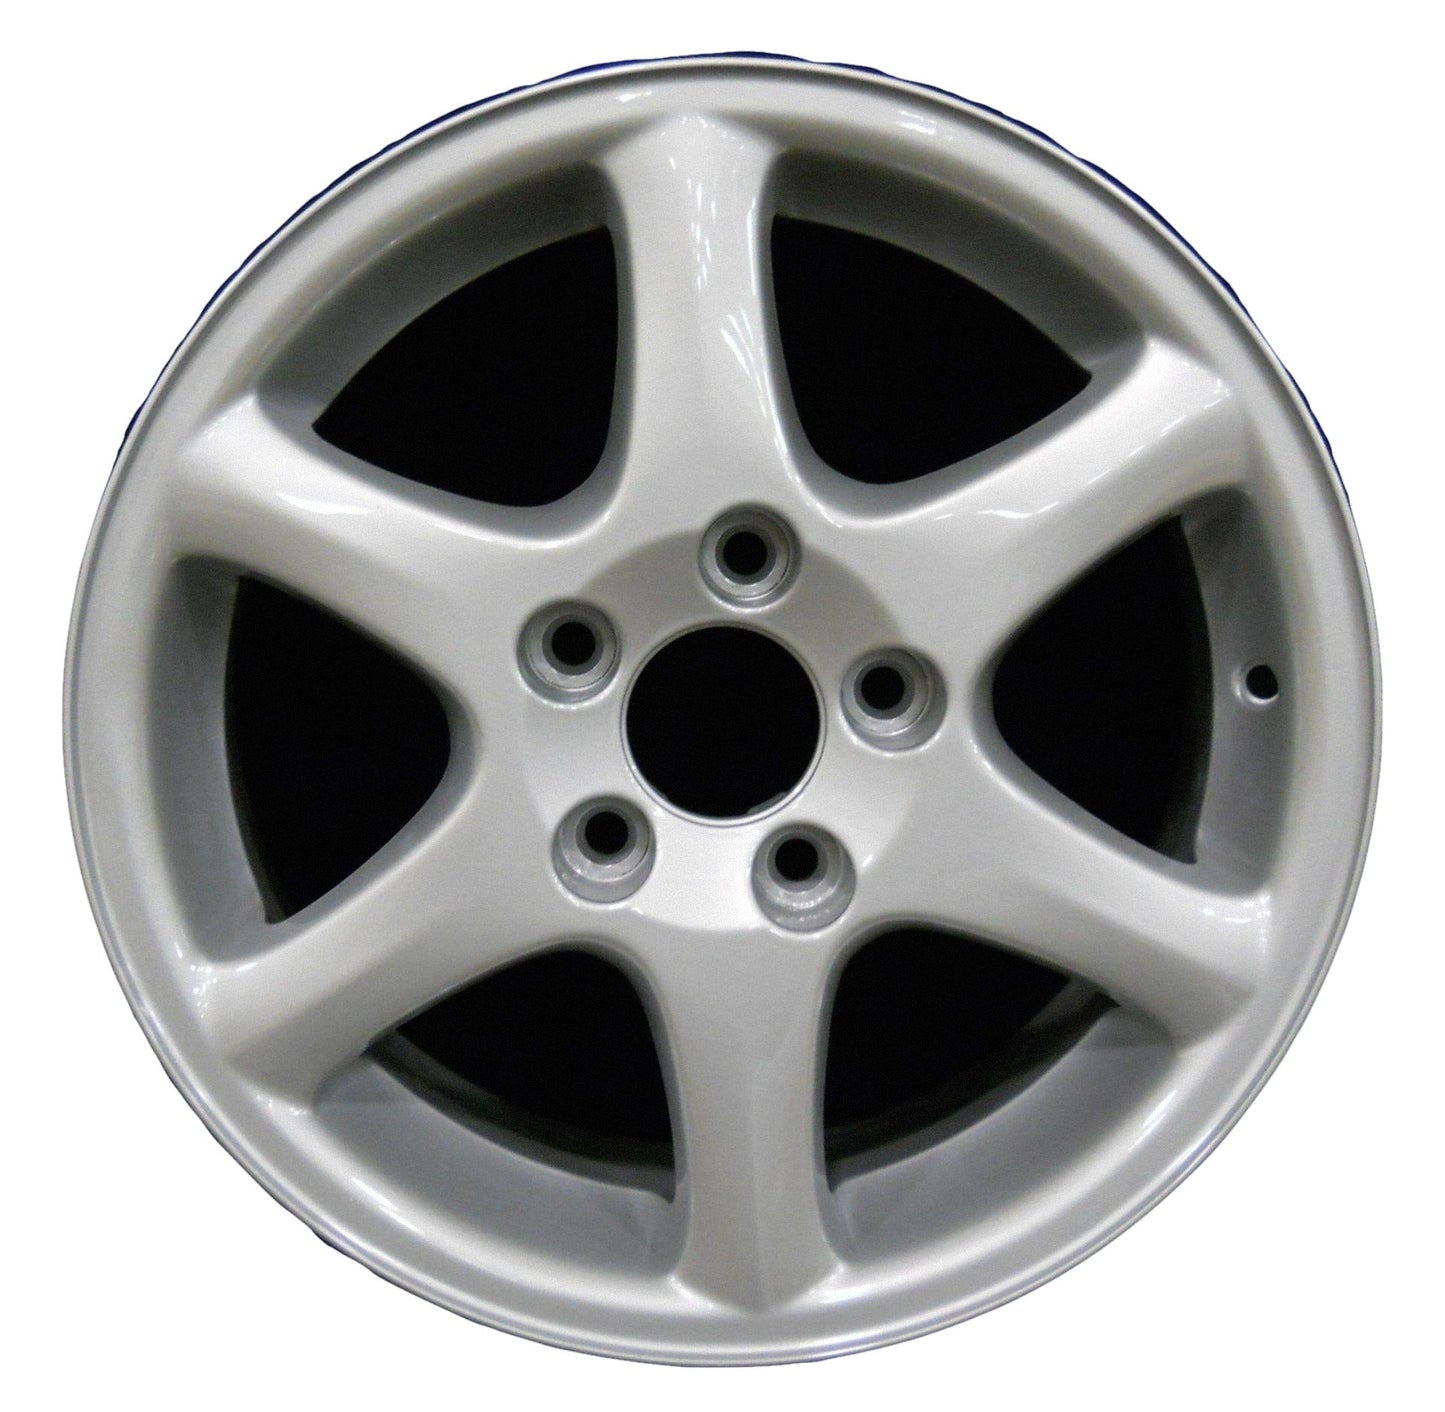 Volvo 70 Series  1998, 1999, 2000 Factory OEM Car Wheel Size 15x6.5 Alloy WAO.70204.PS05.FF